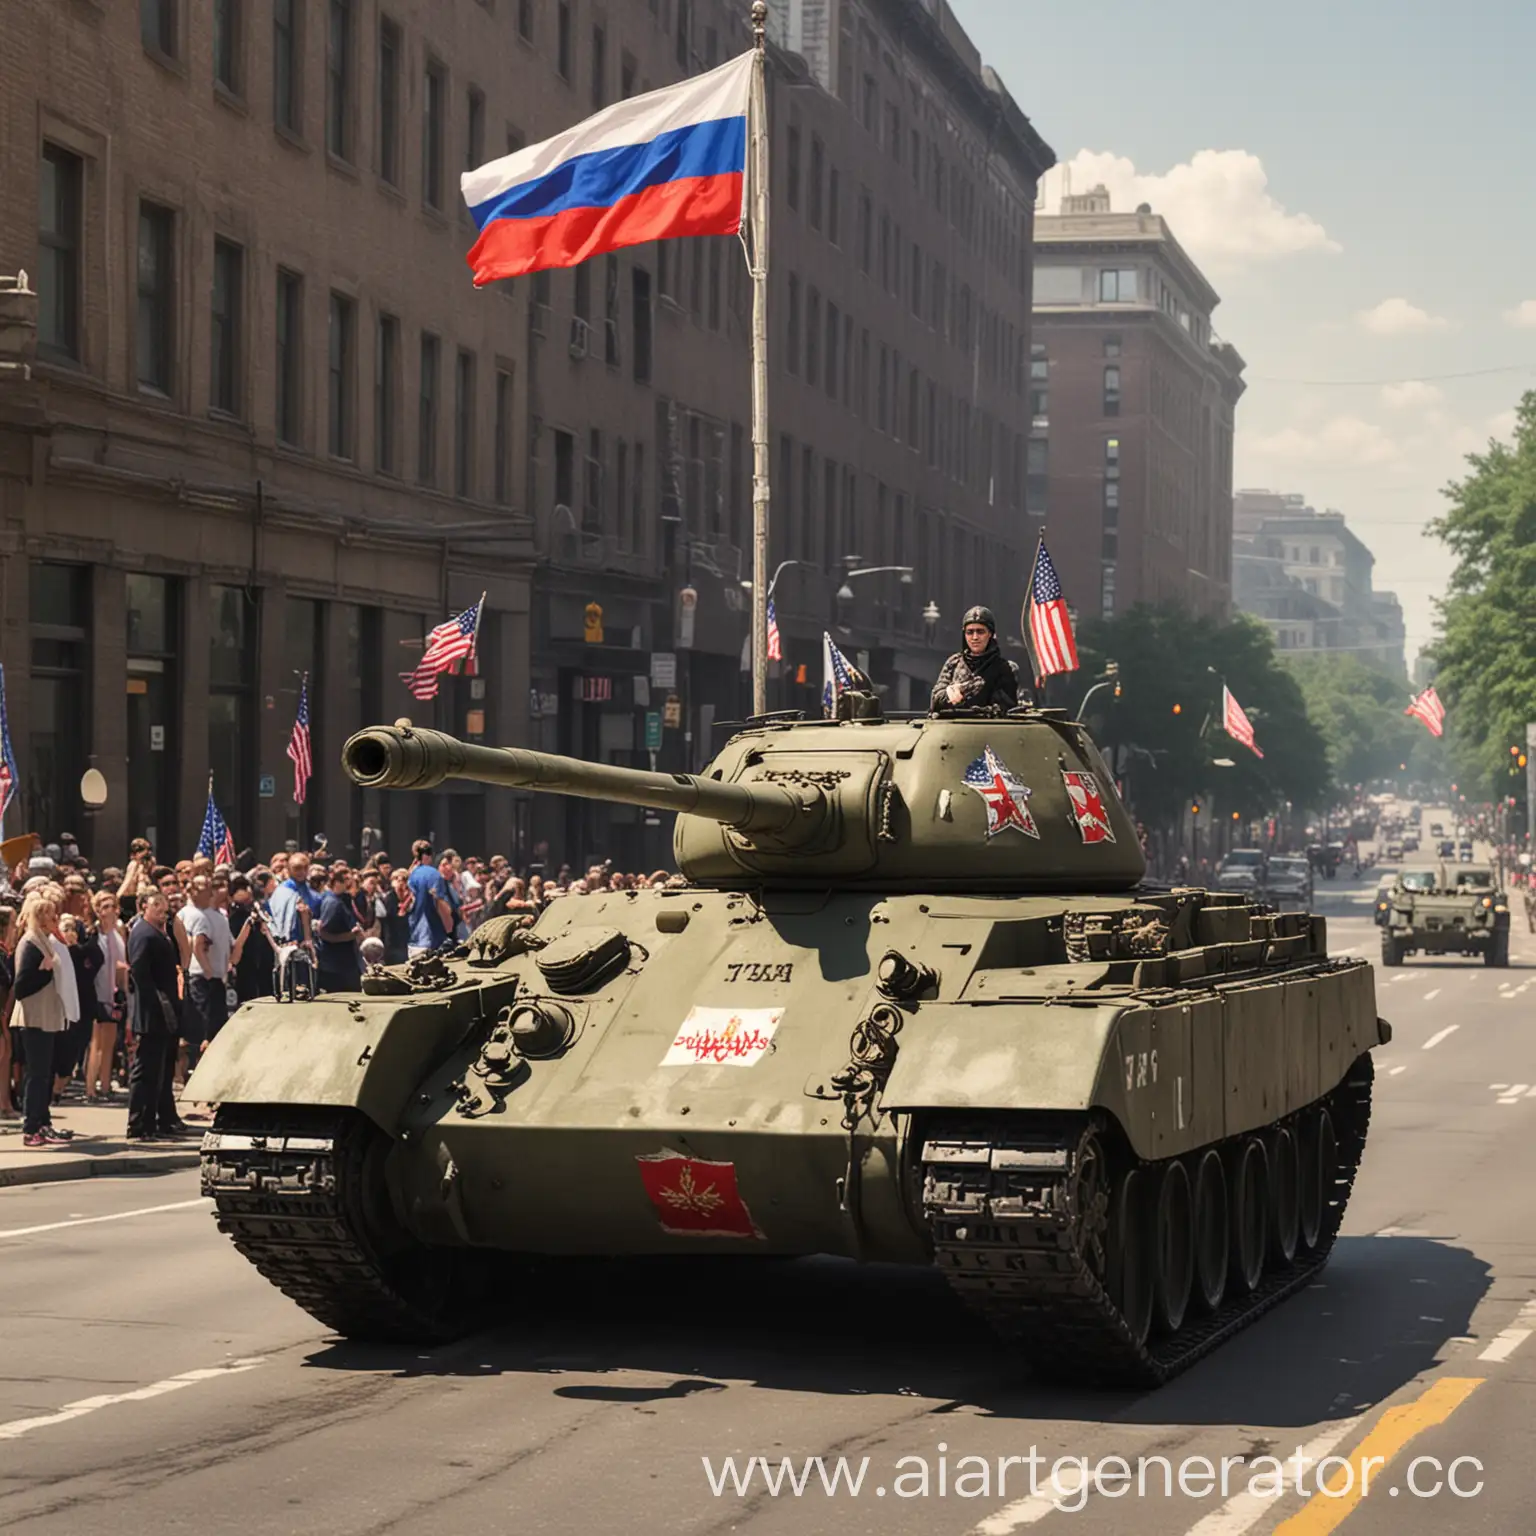 Tank T-34 is driving down Washington Street with a Russian flag